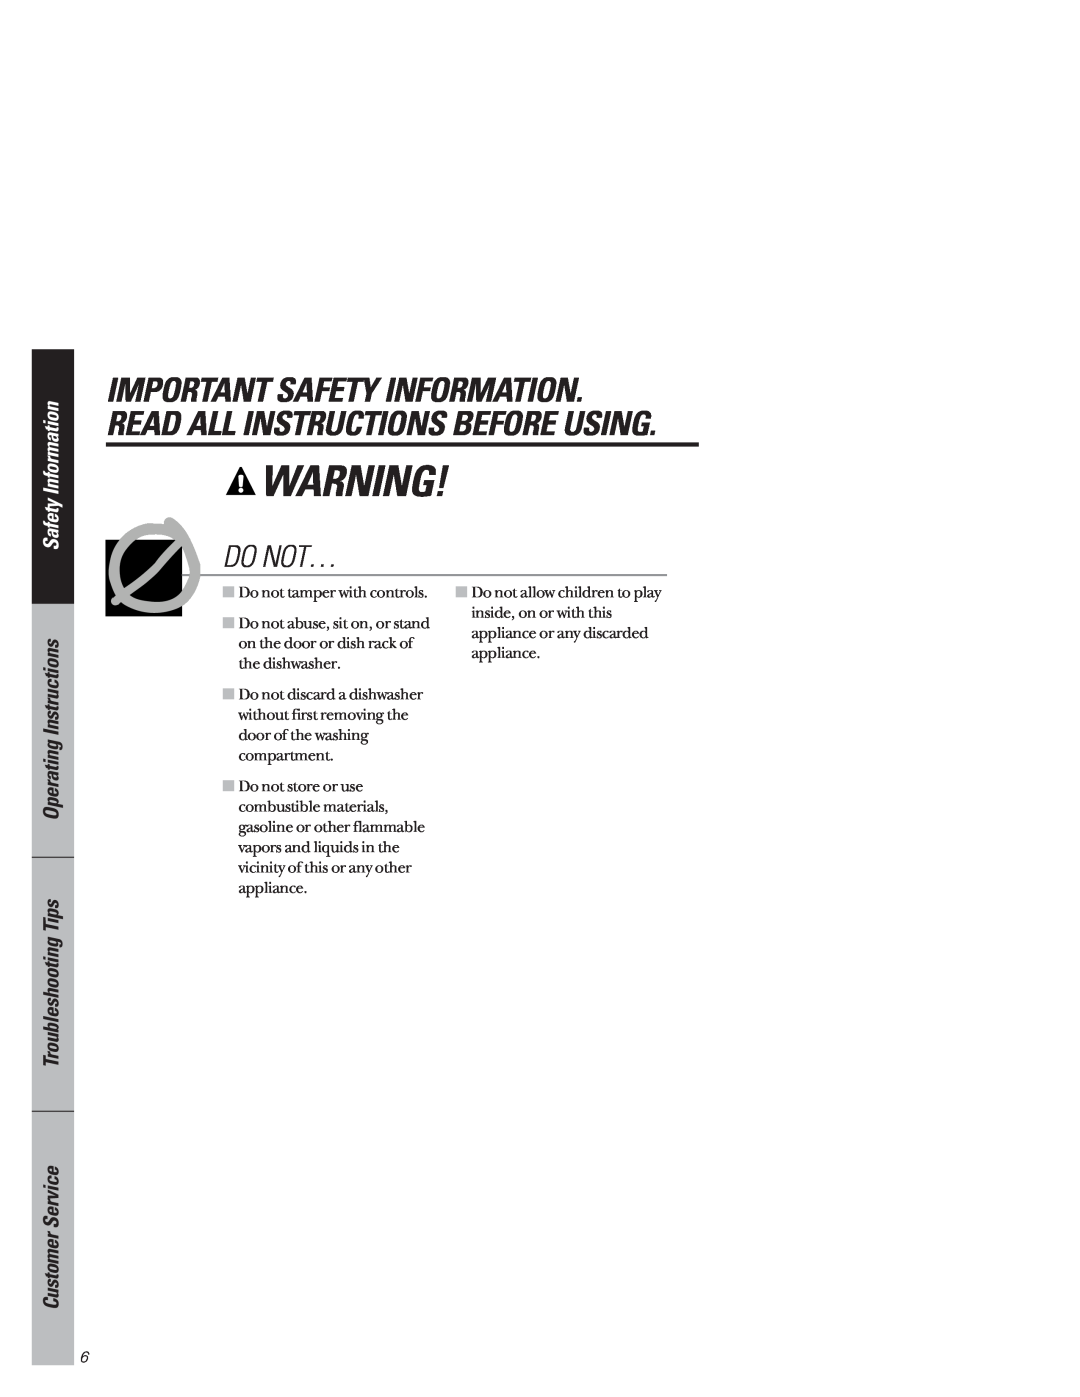 GE GSD4610 owner manual Do Not…, Important Safety Information. Read All Instructions Before Using 